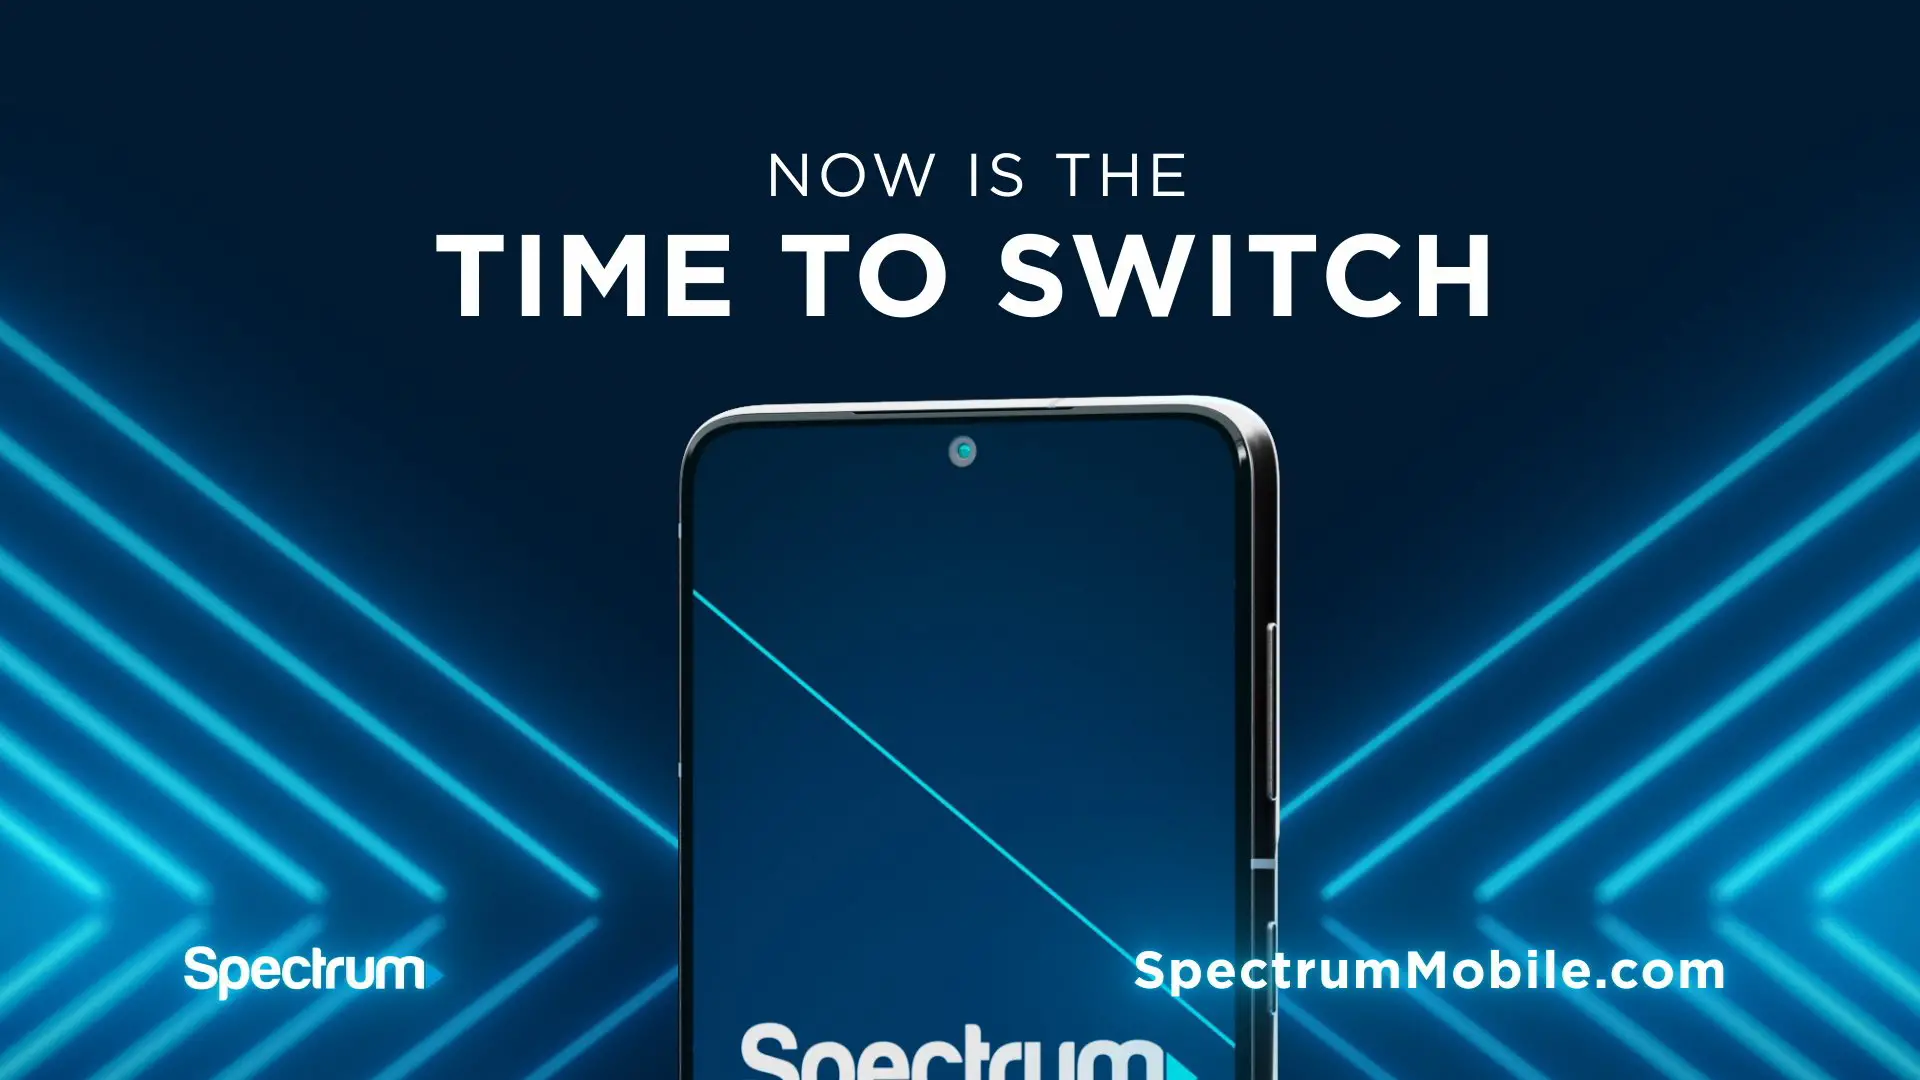 How Do I Switch to Spectrum Mobile